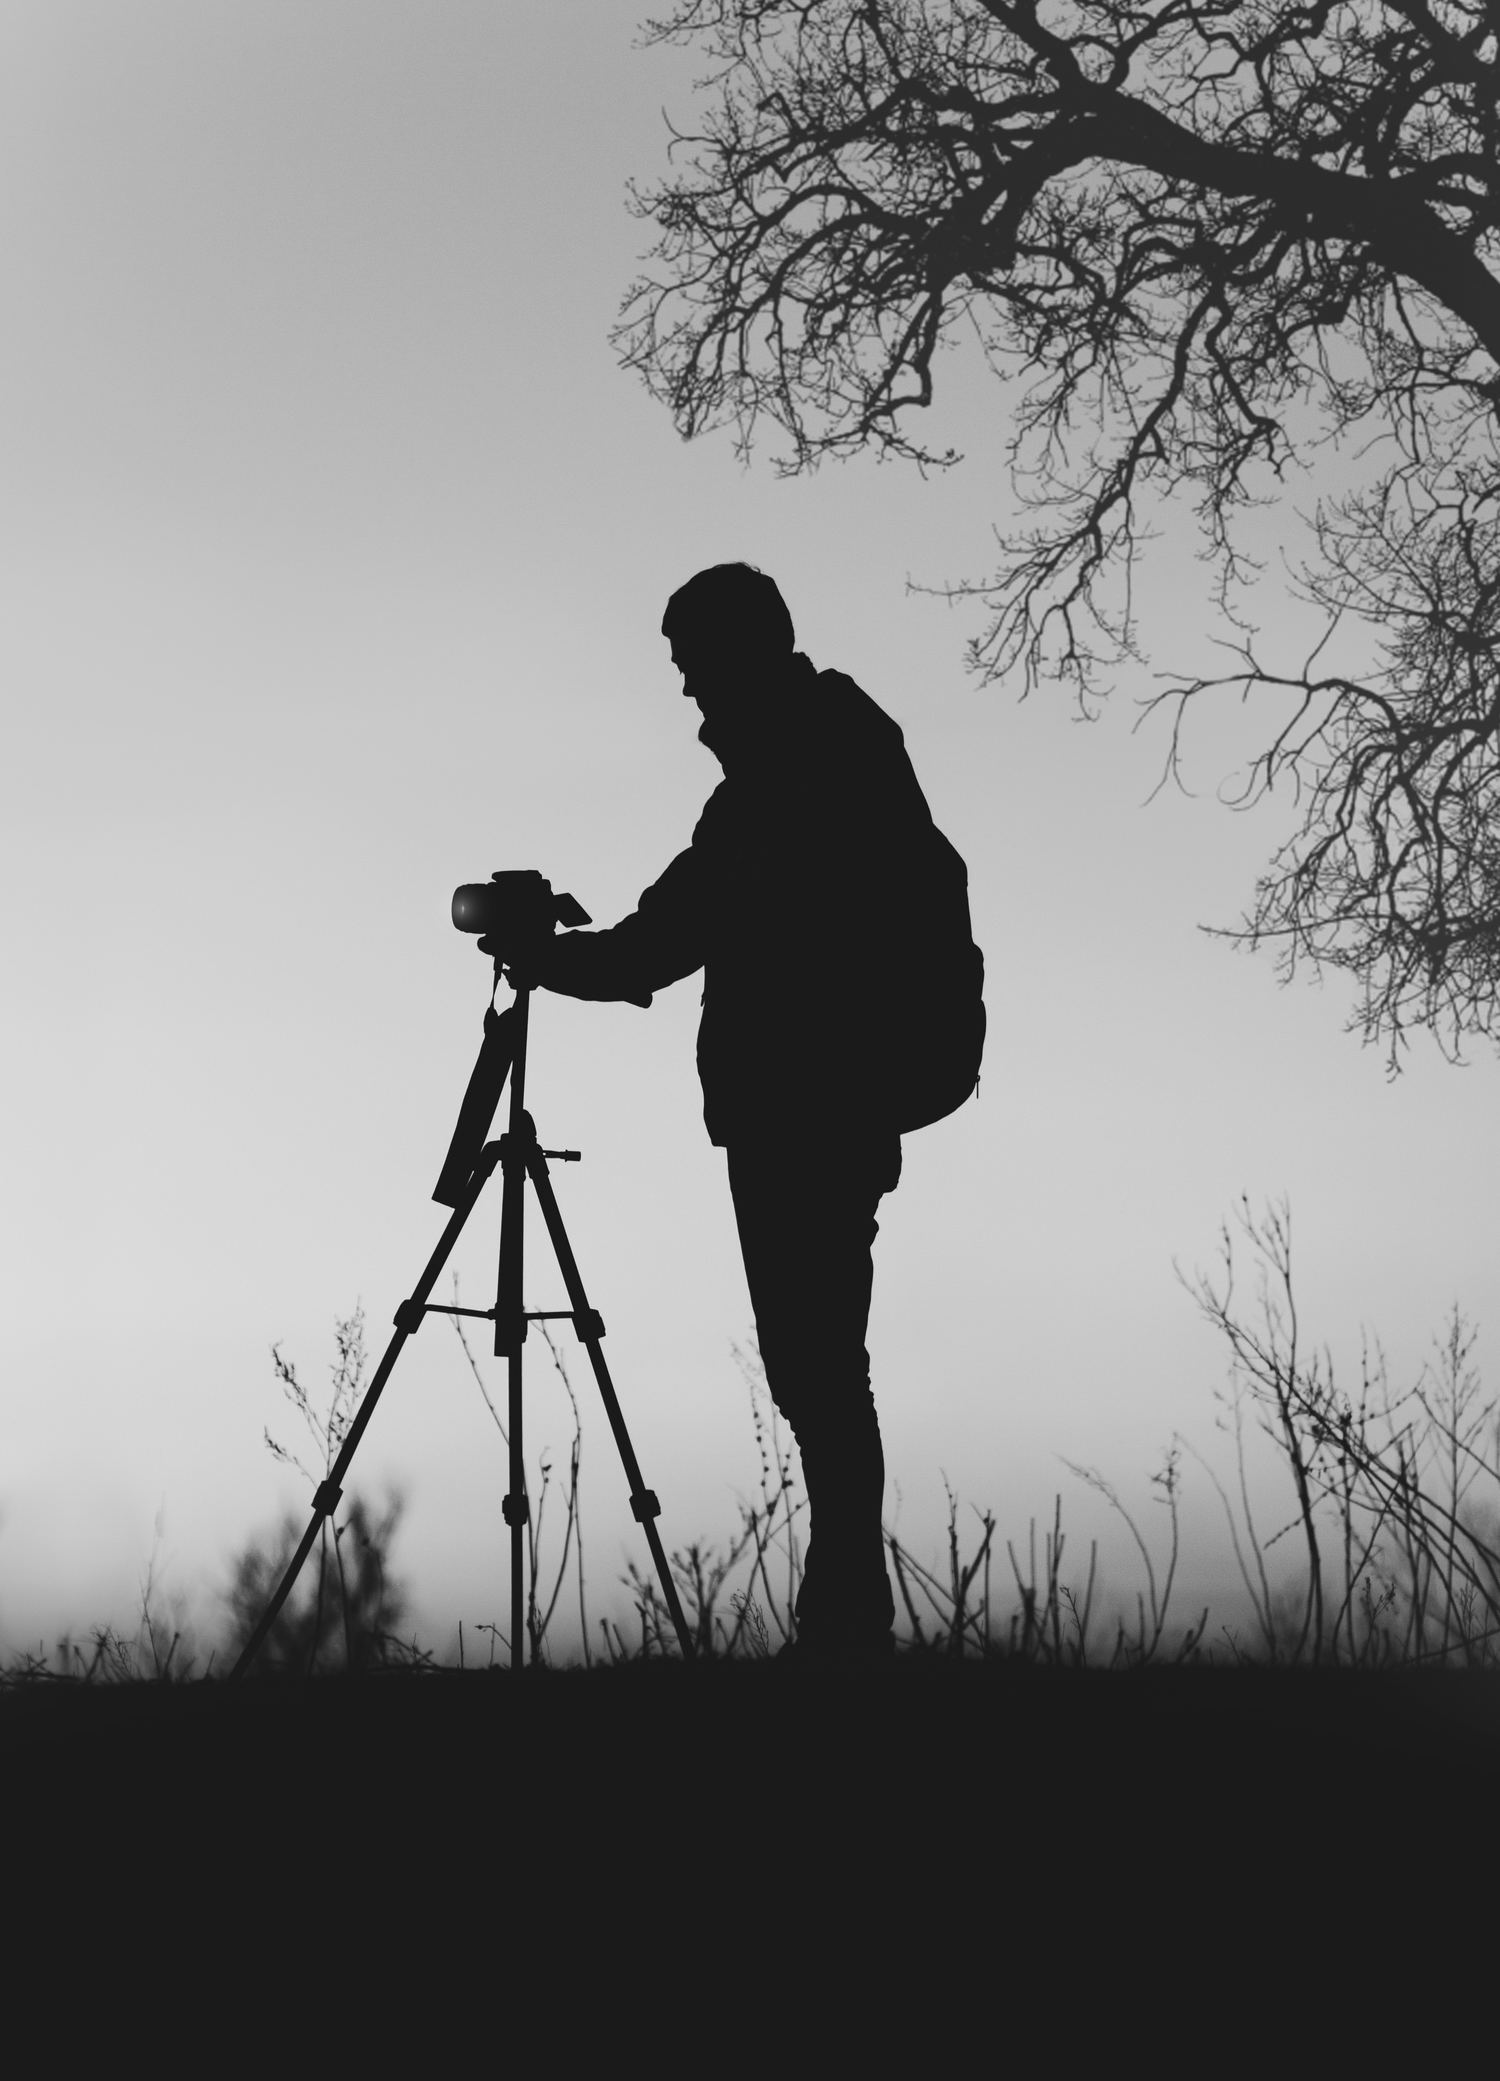 HOW TO CHOOSE A GOOD TRIPOD FOR YOUR NEXT NIGHT PHOTOGRAPHY (AND NOT FAIL)